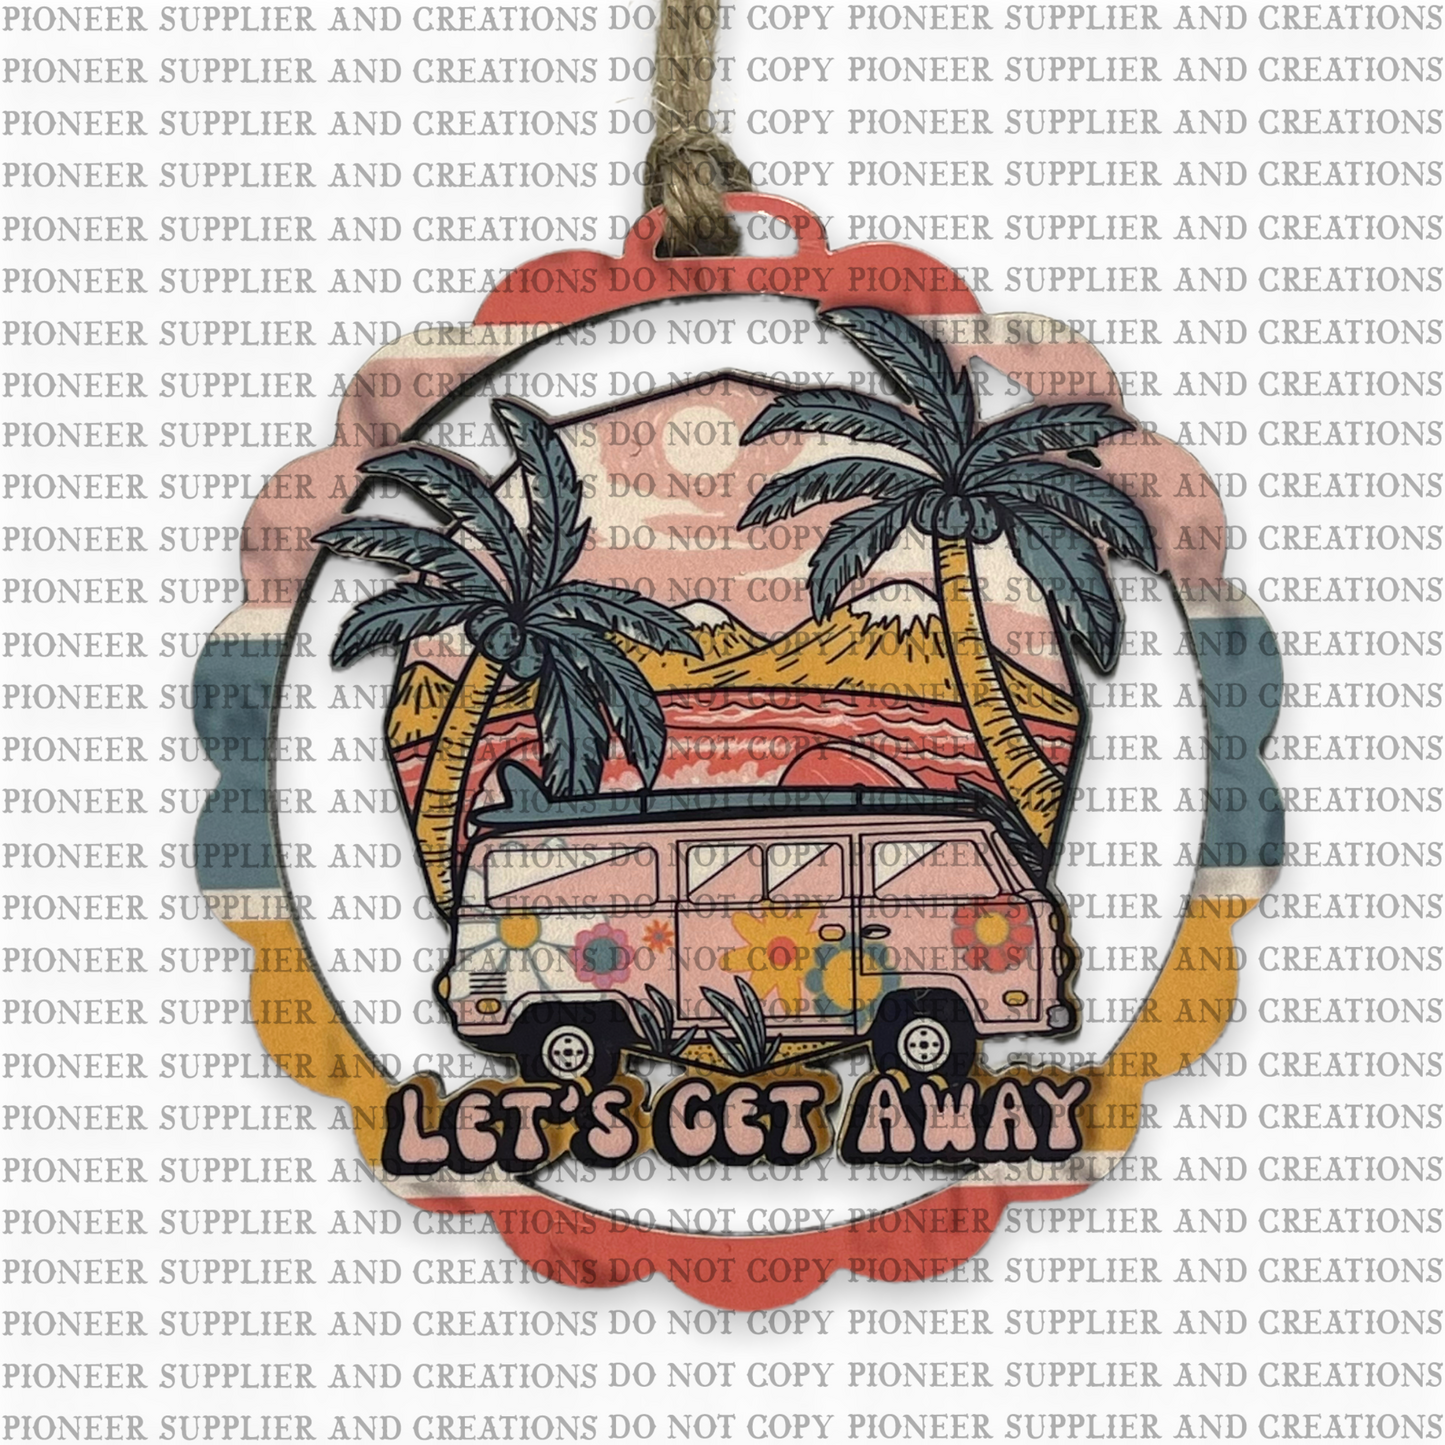 Lets Get Away Ornament & Transfer Sublimation Blank